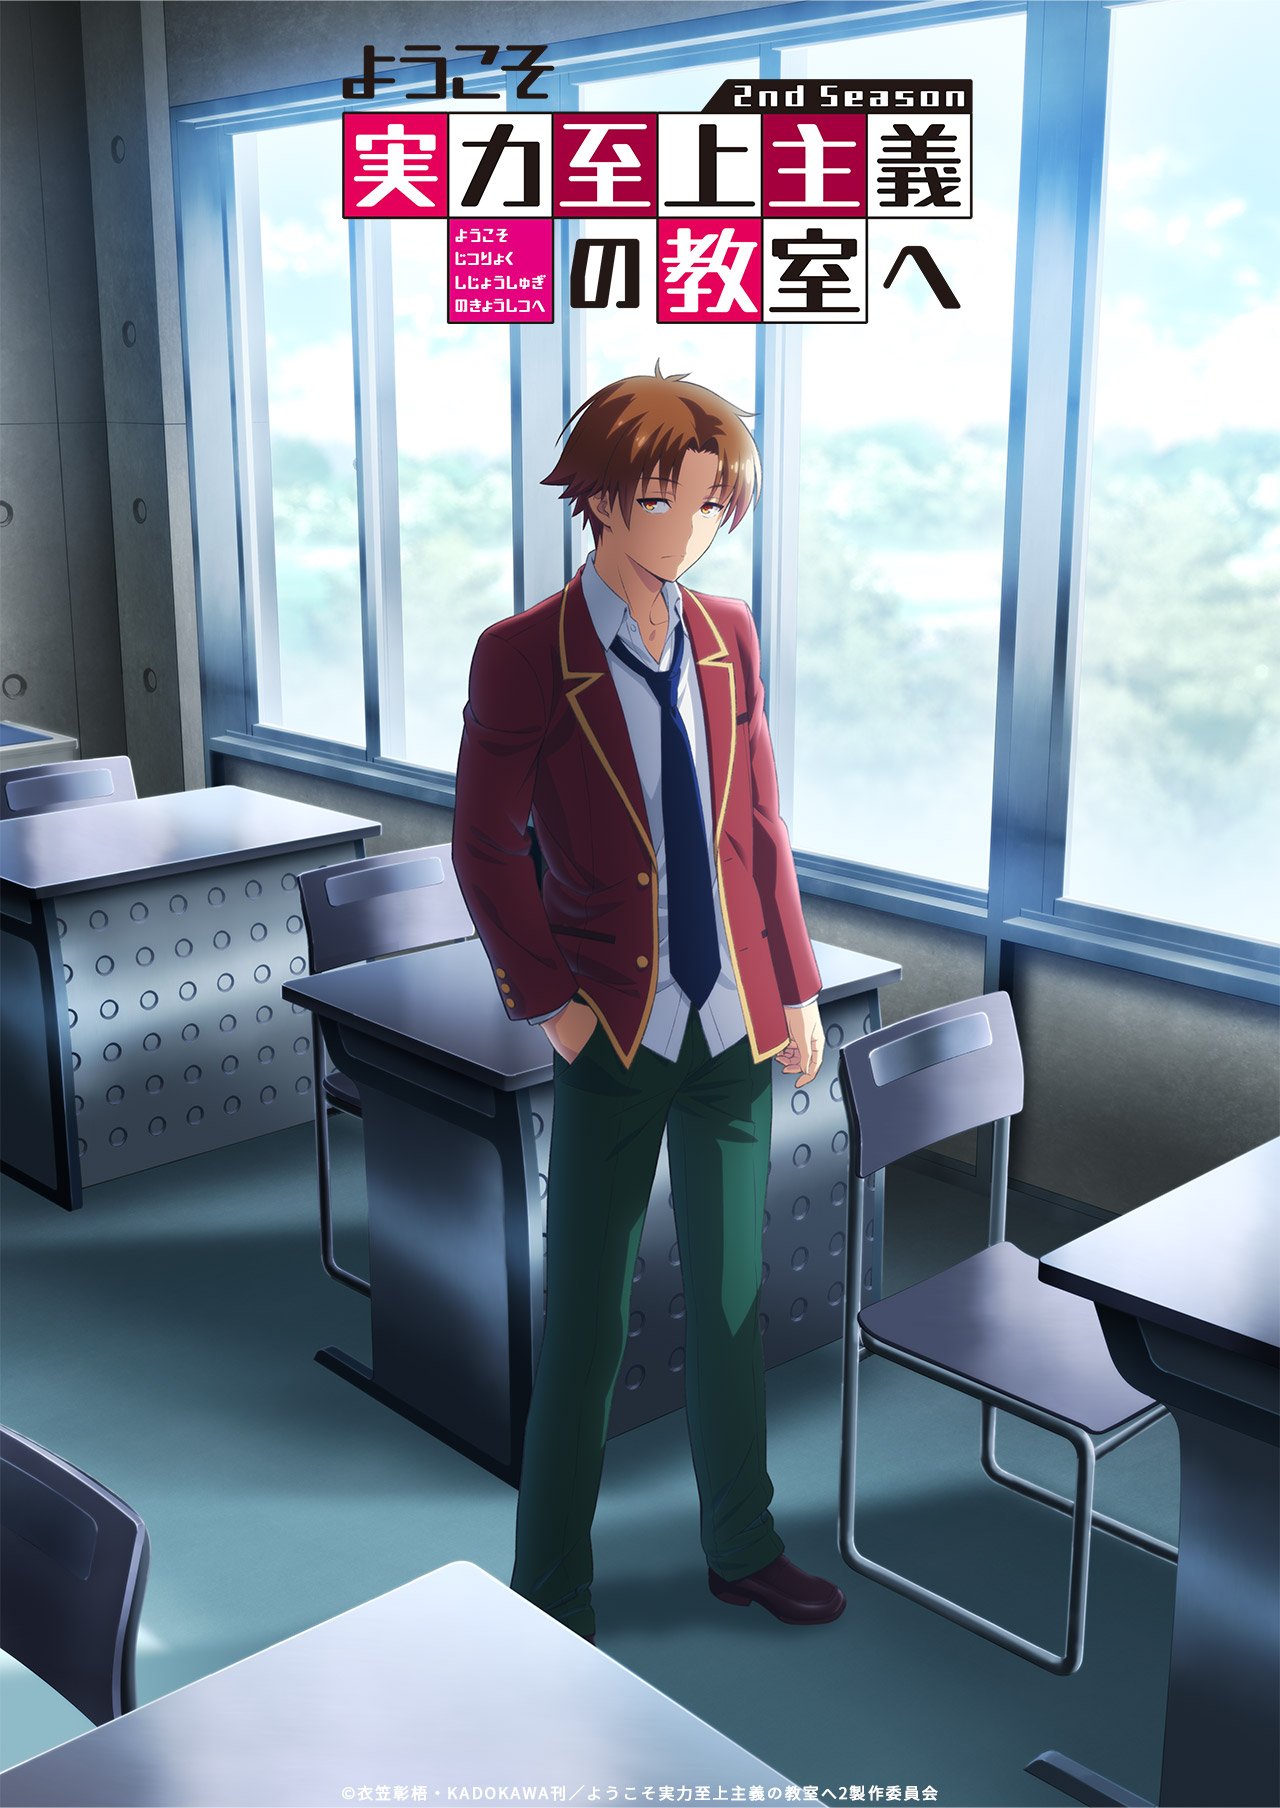 Anime News And Facts on X: Classroom of the Elite Season 2 will premiere  in July 2022. The third season will premiere sometime in 2023. New Key  Visual revealed; Studio Lerche.  /